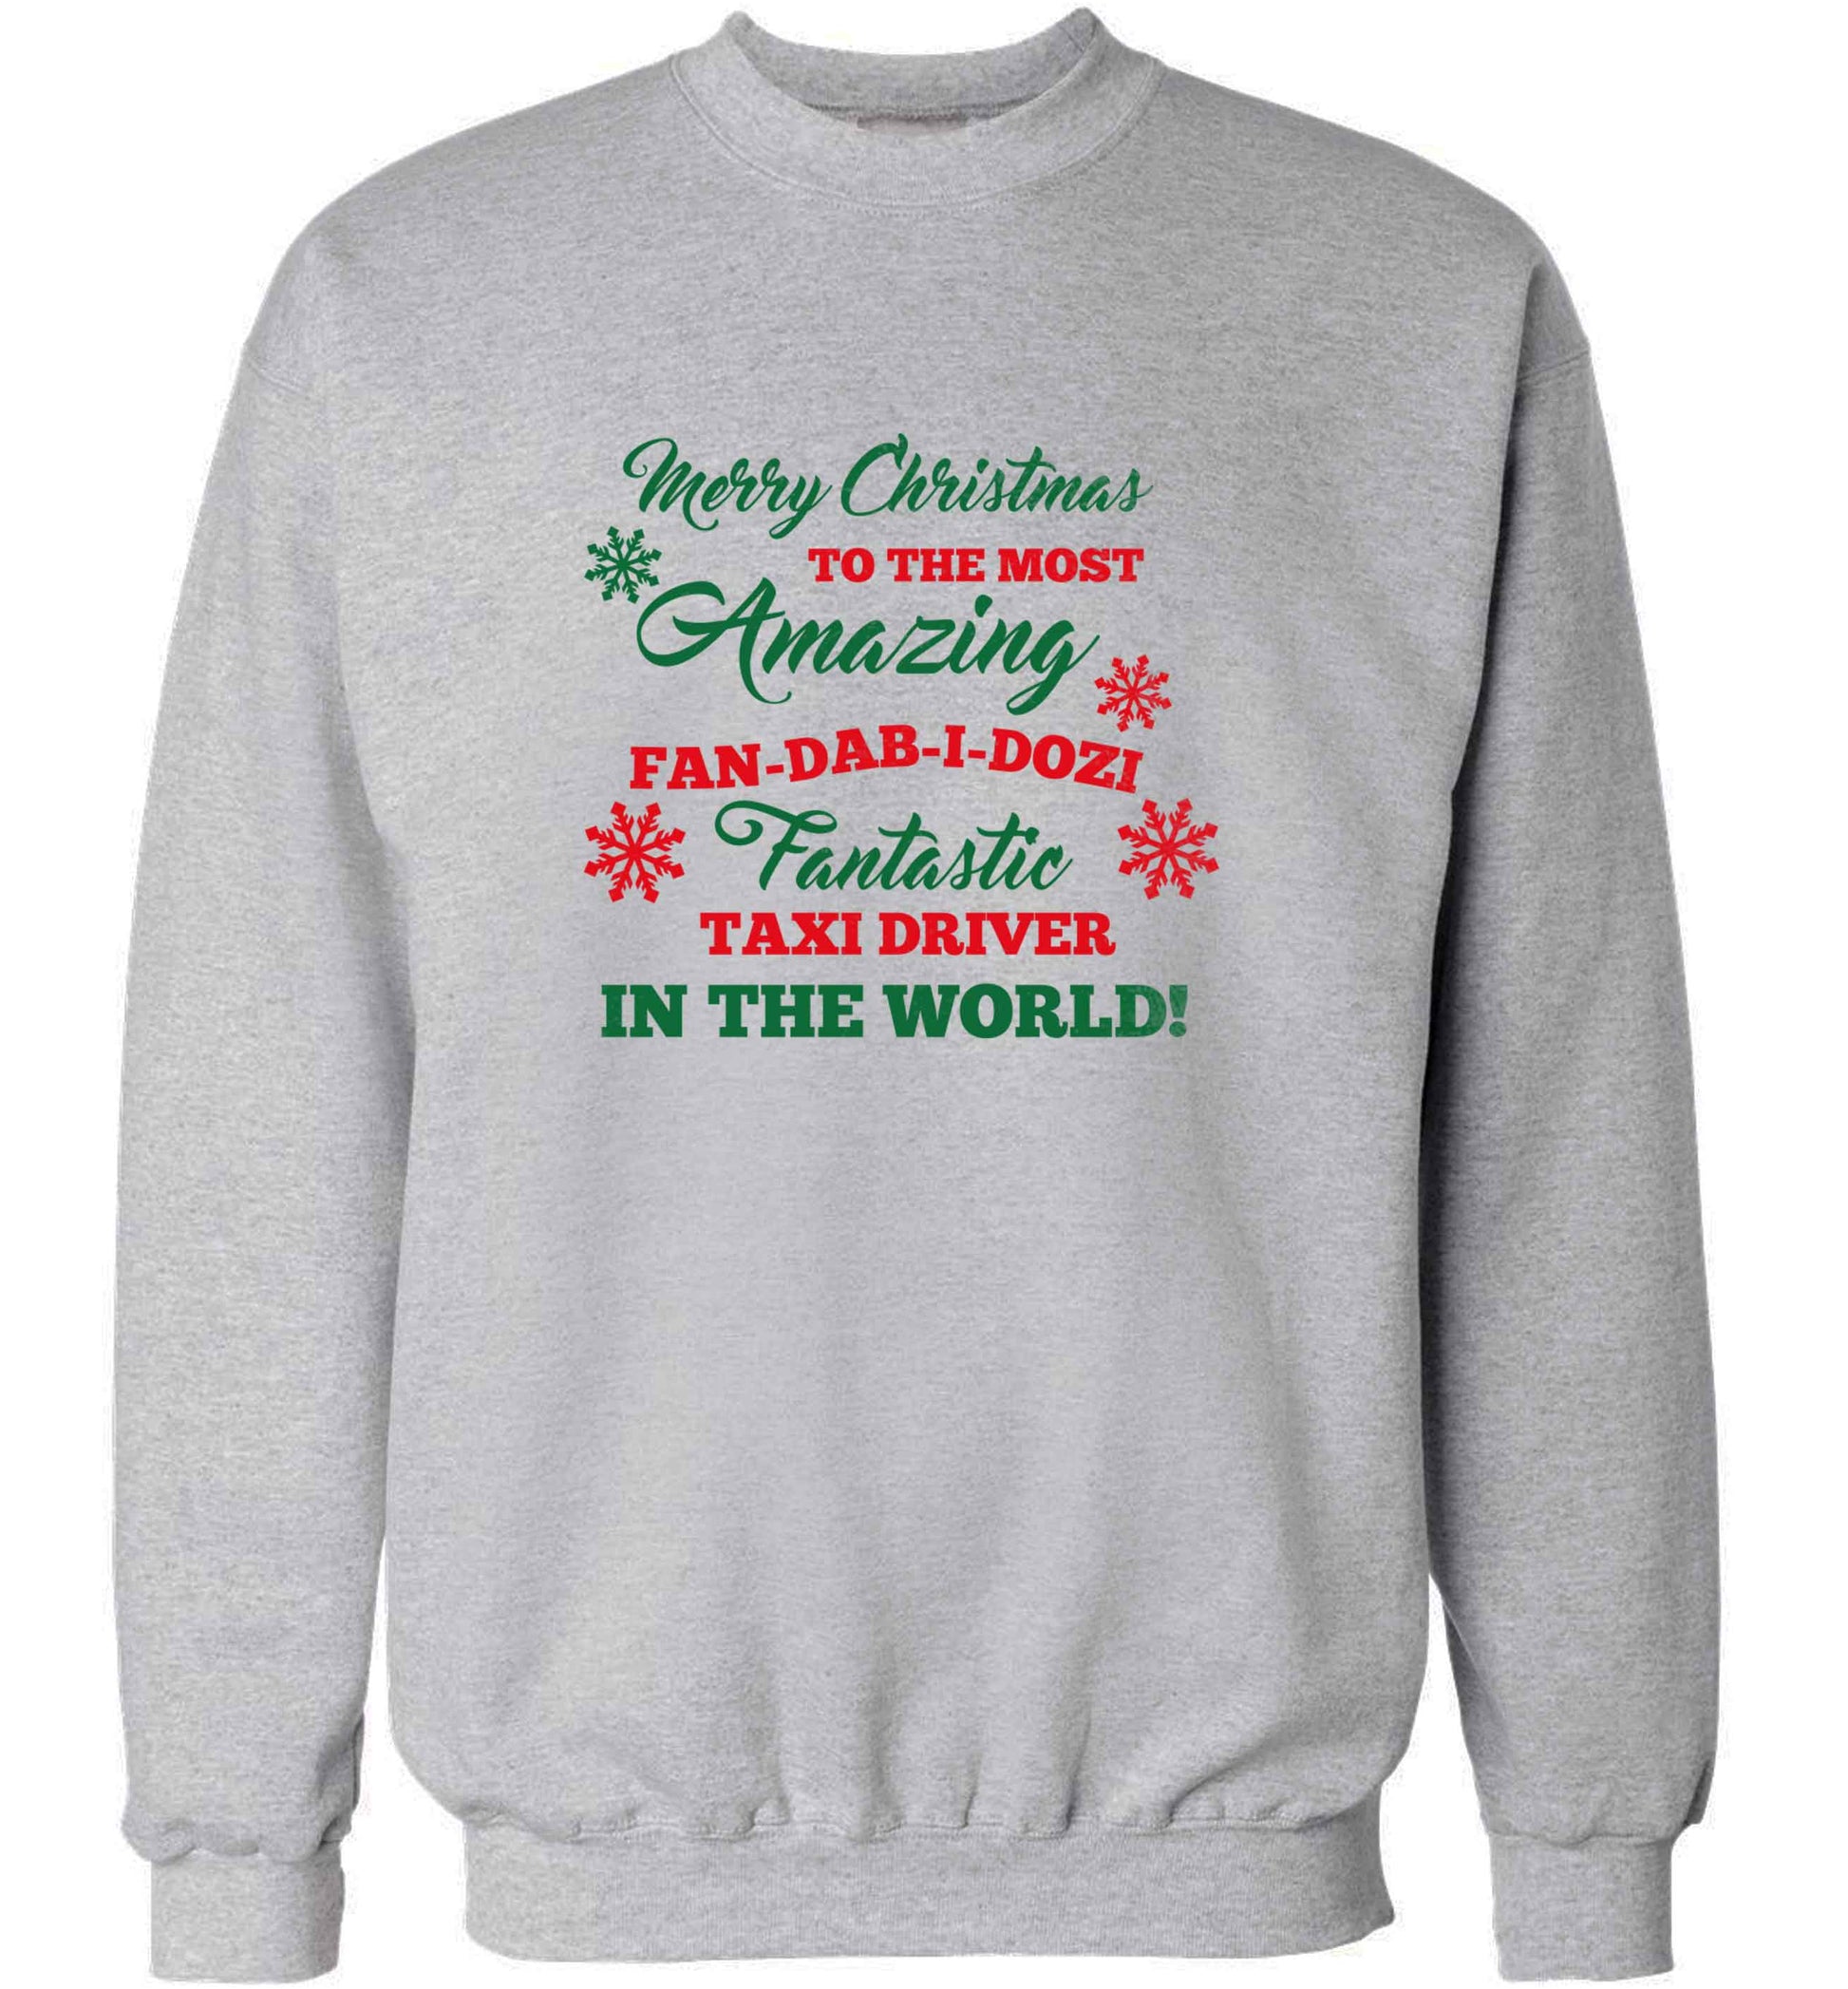 Merry Christmas to the most amazing taxi driver in the world! adult's unisex grey sweater 2XL